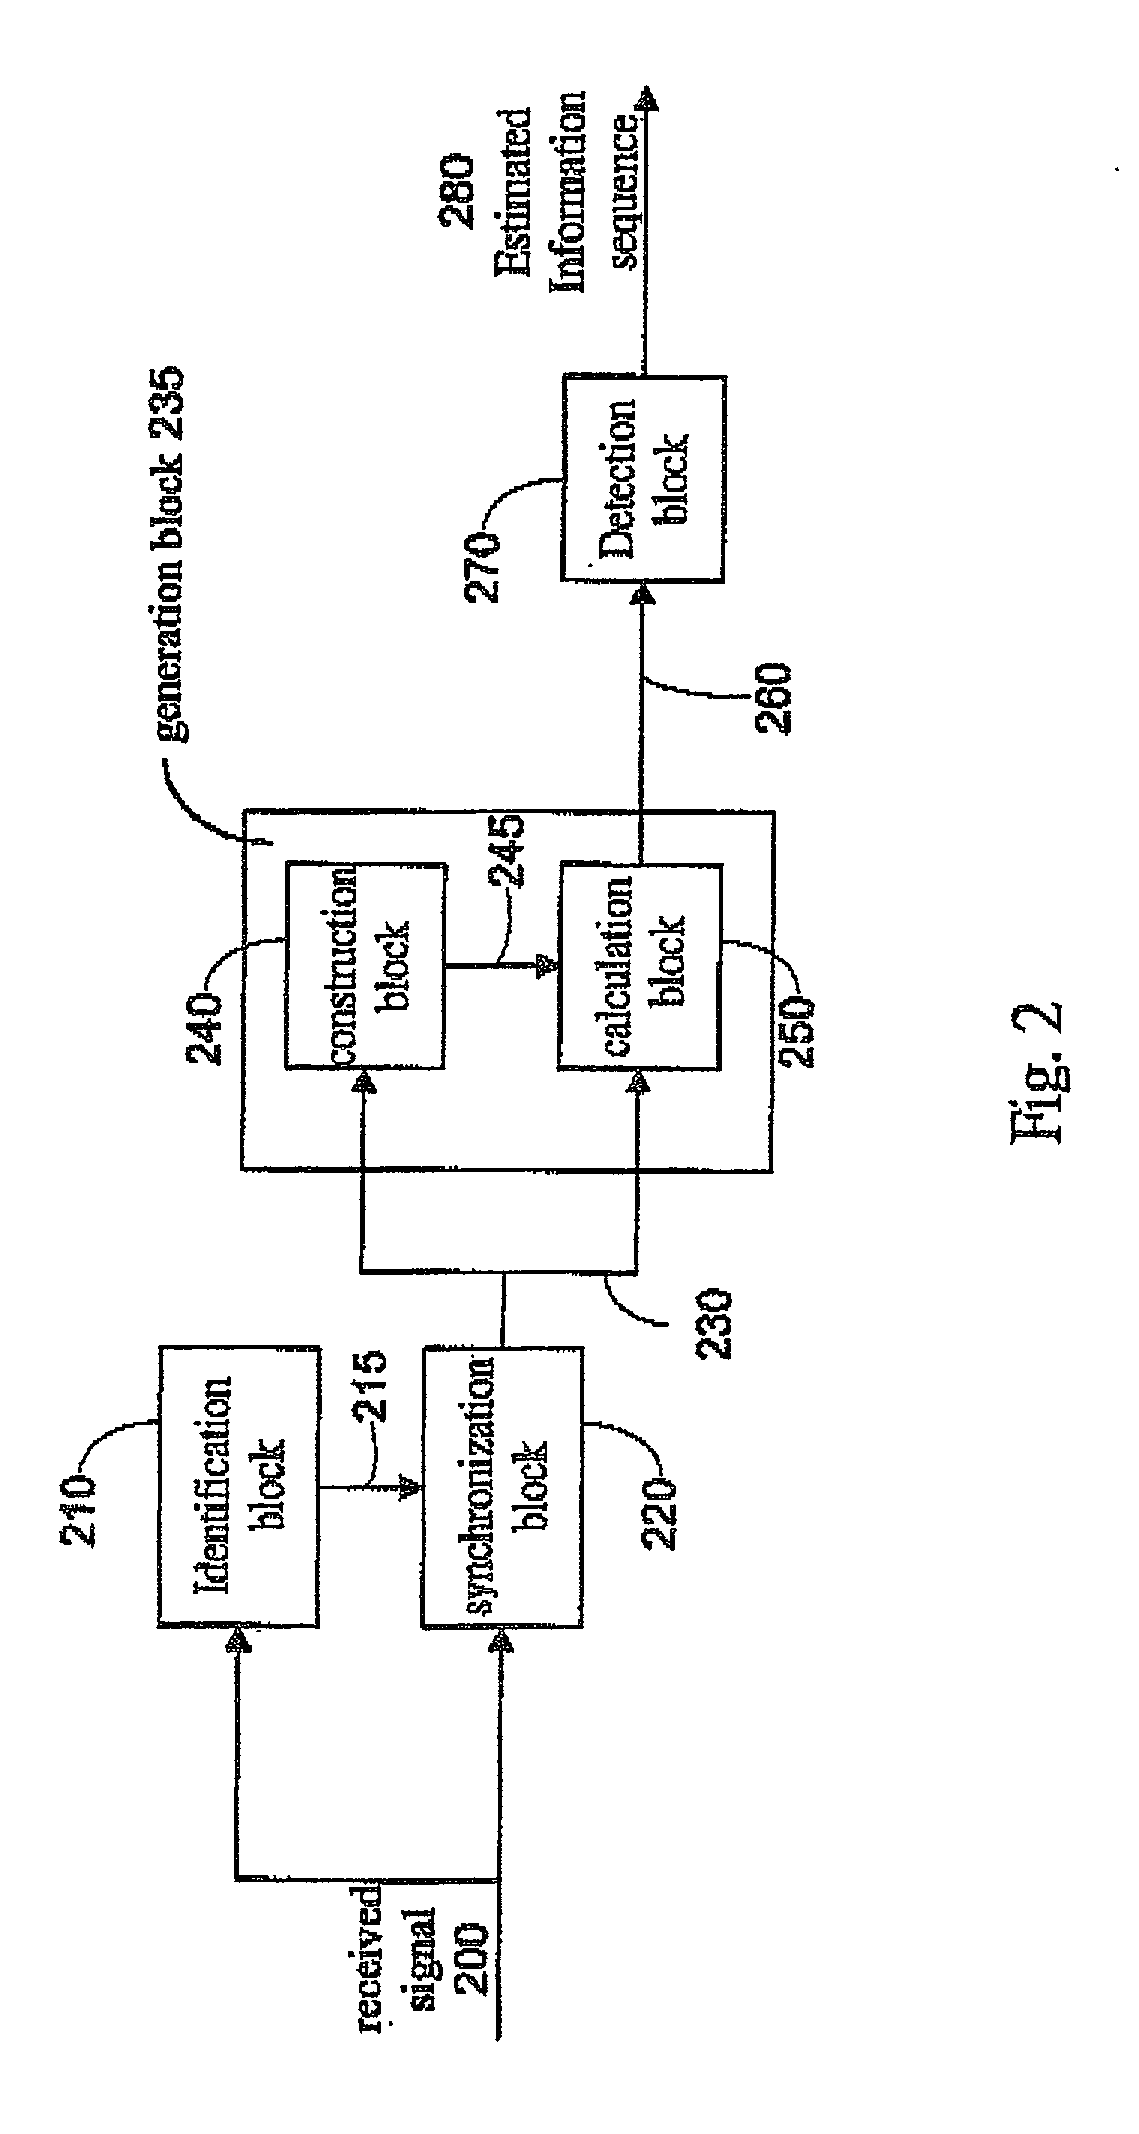 Linear interference suppression detection